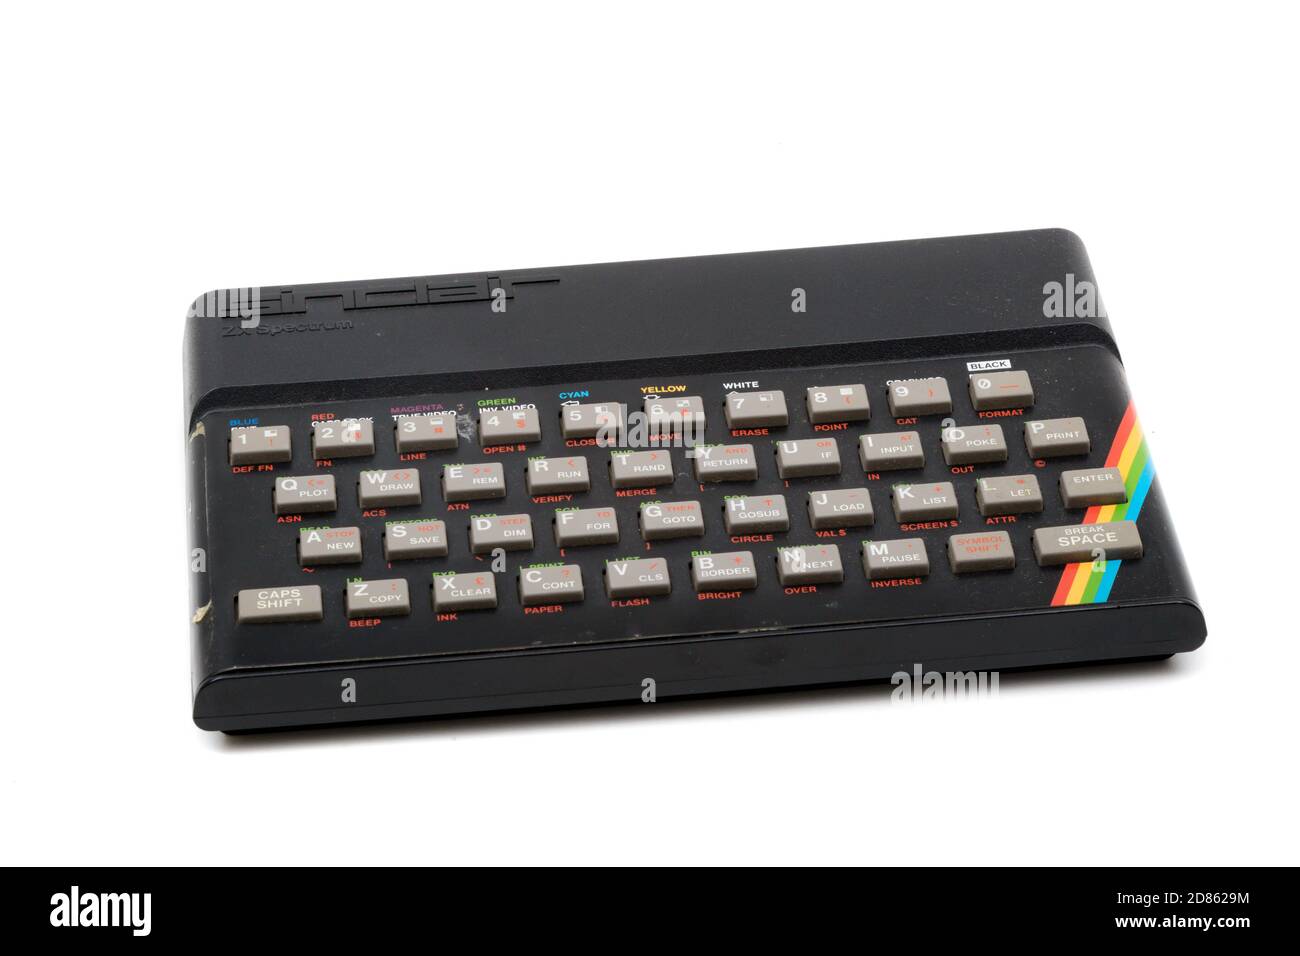 London, United Kingdom, 21st September 2020:- A retro Sinclair ZX Spectrum 48k home computer isolated on a white background Stock Photo